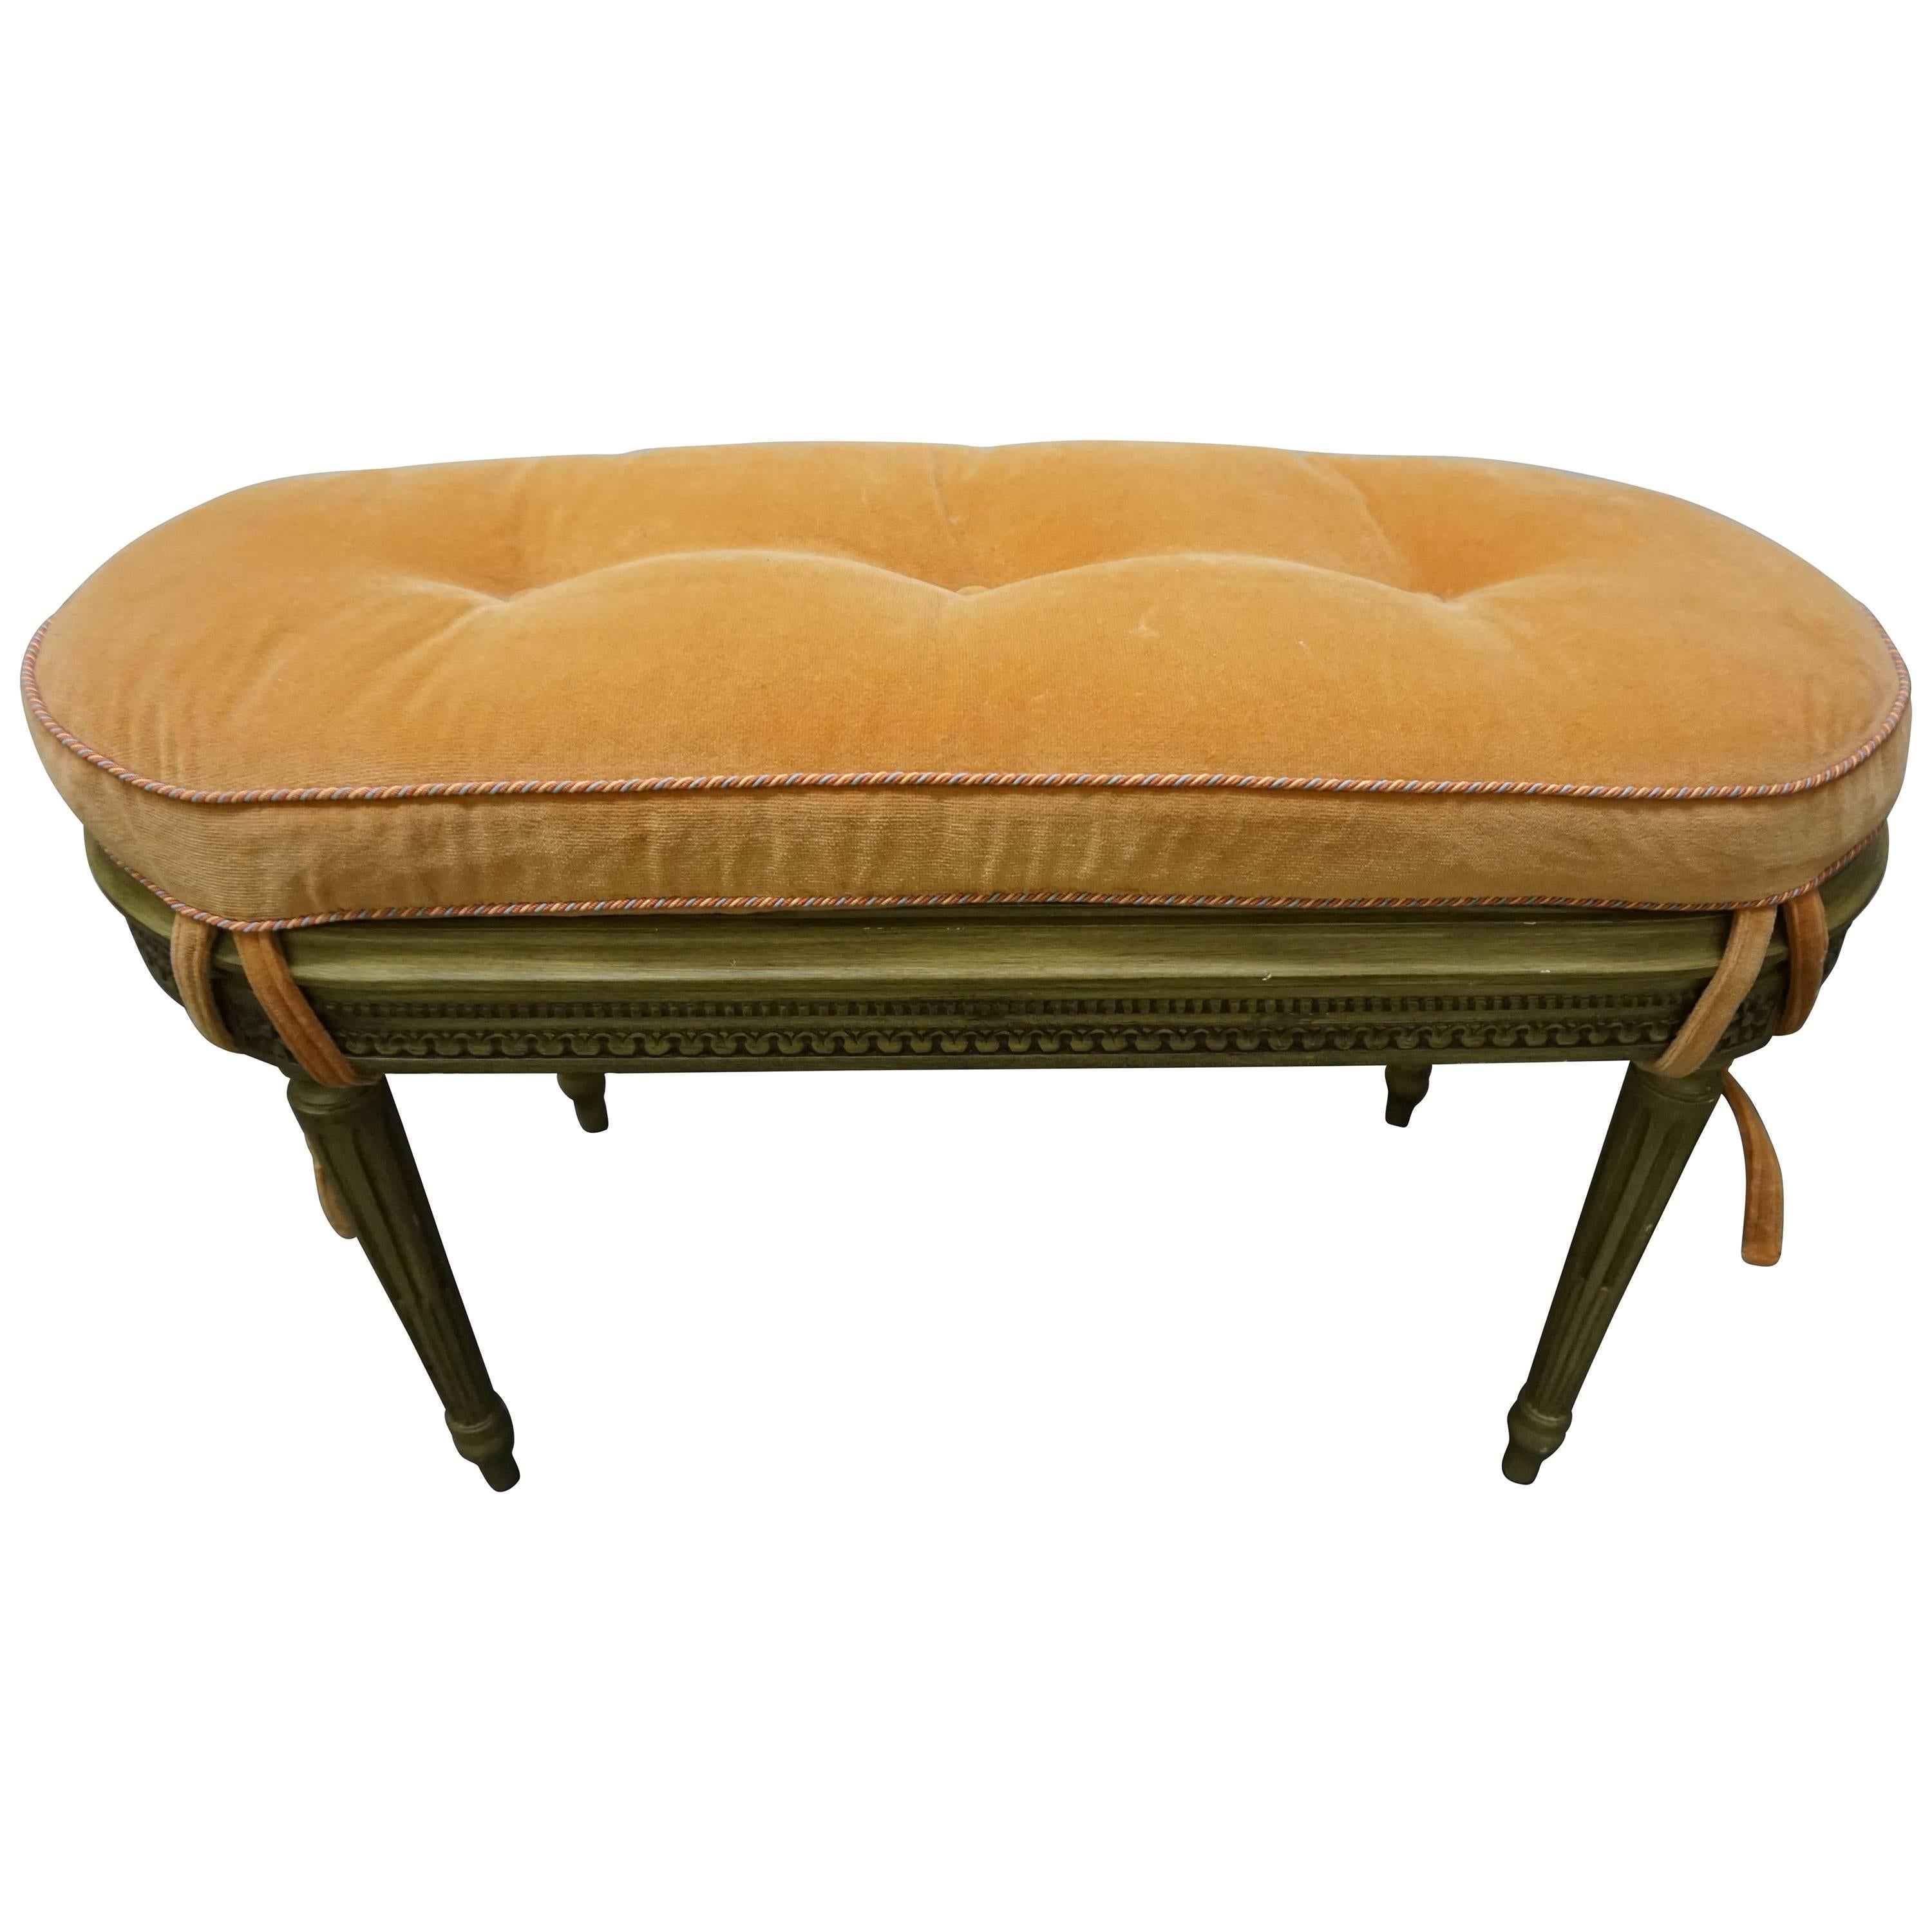 Lovely French Louis XVI Style Caned Seat Bench Hollywood Regency